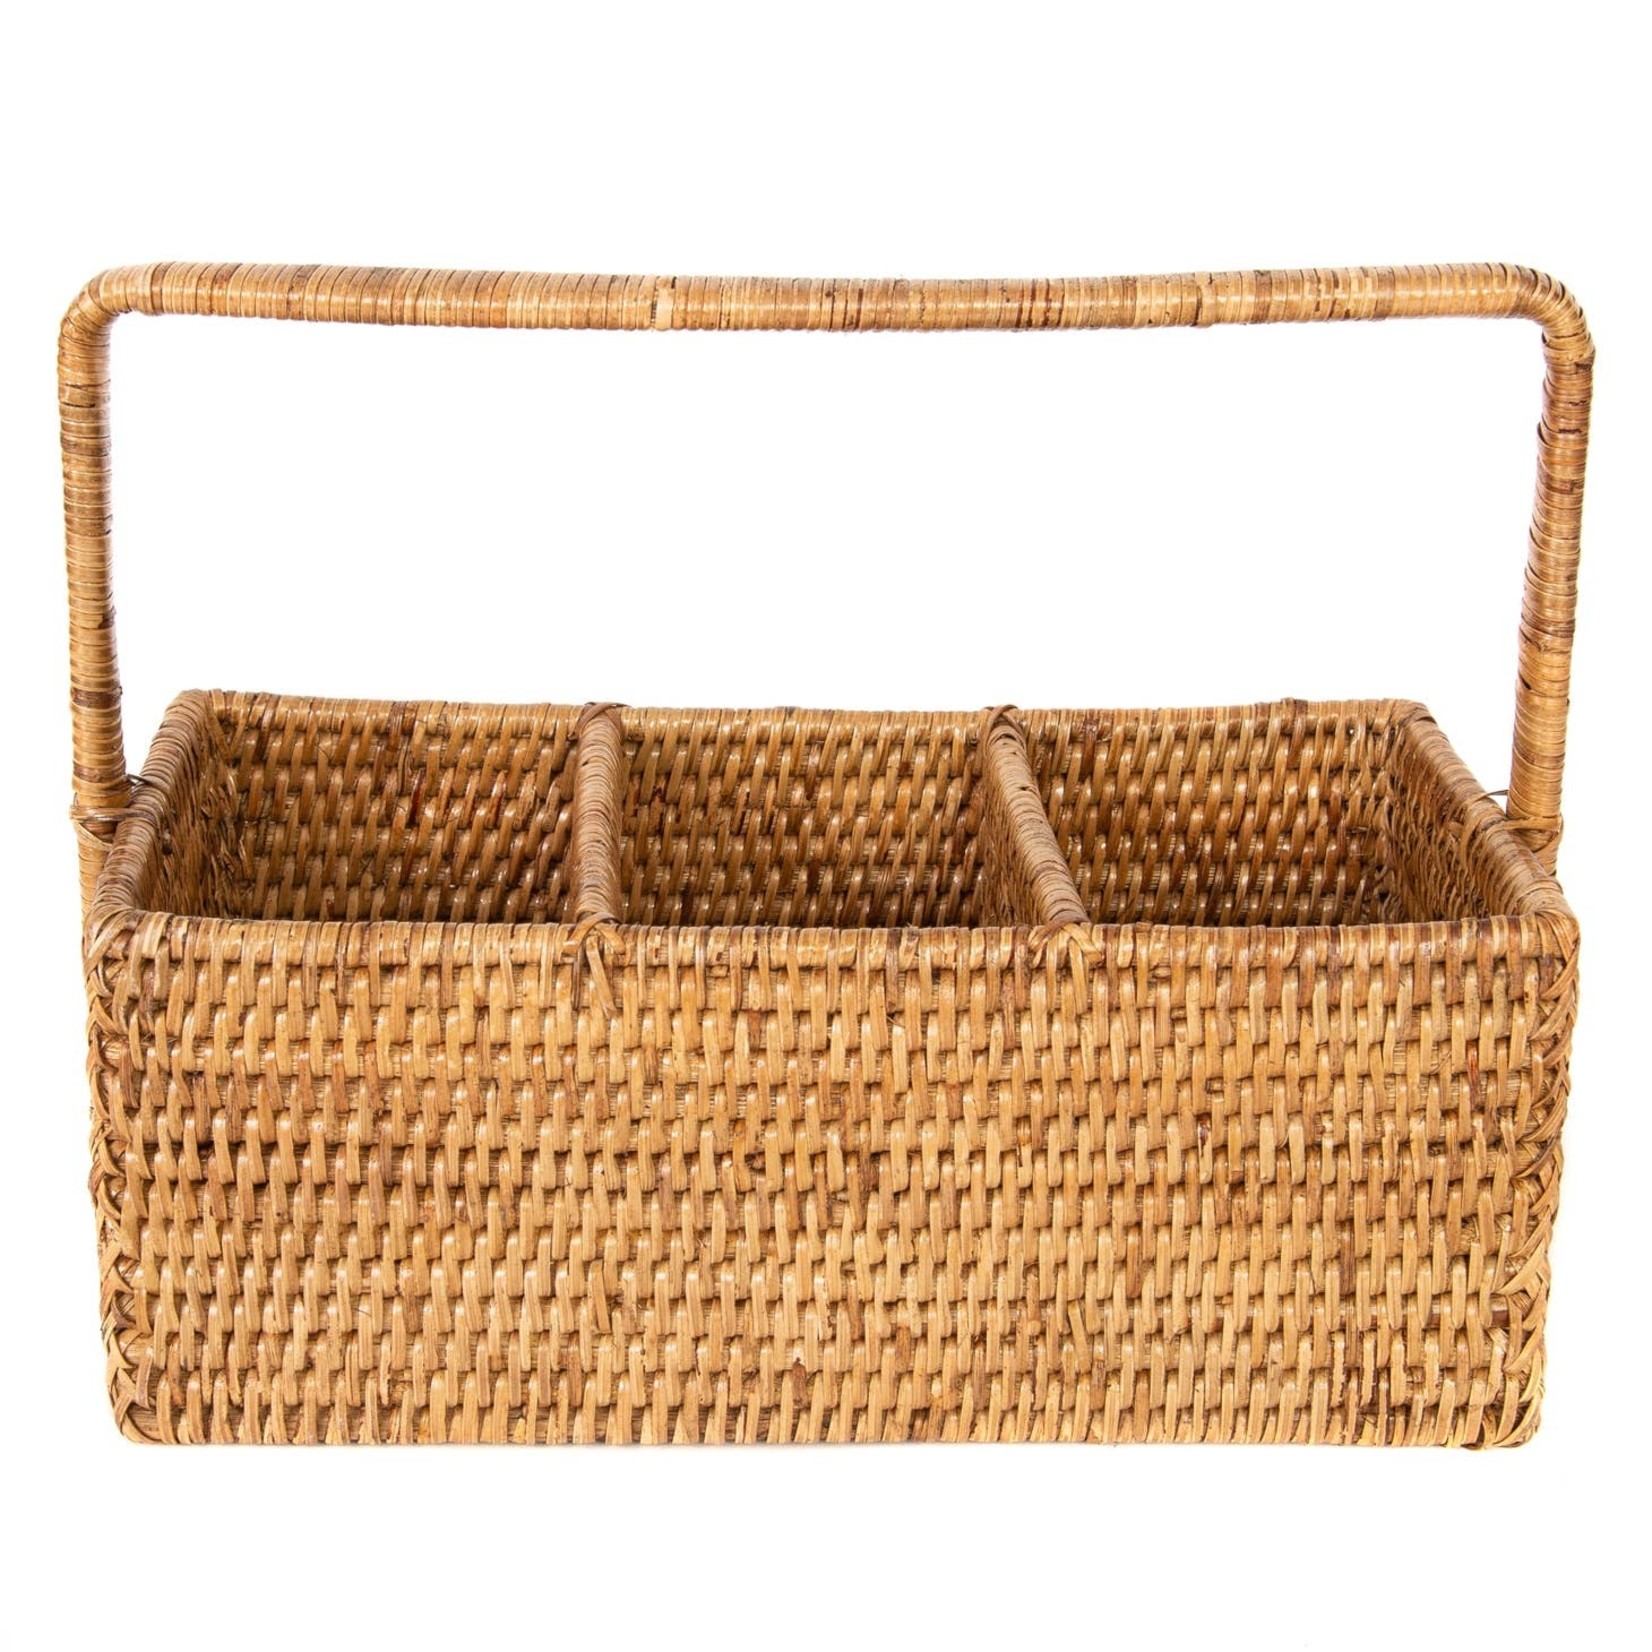 Artifacts Trading Company Rattan 3 Section Caddy